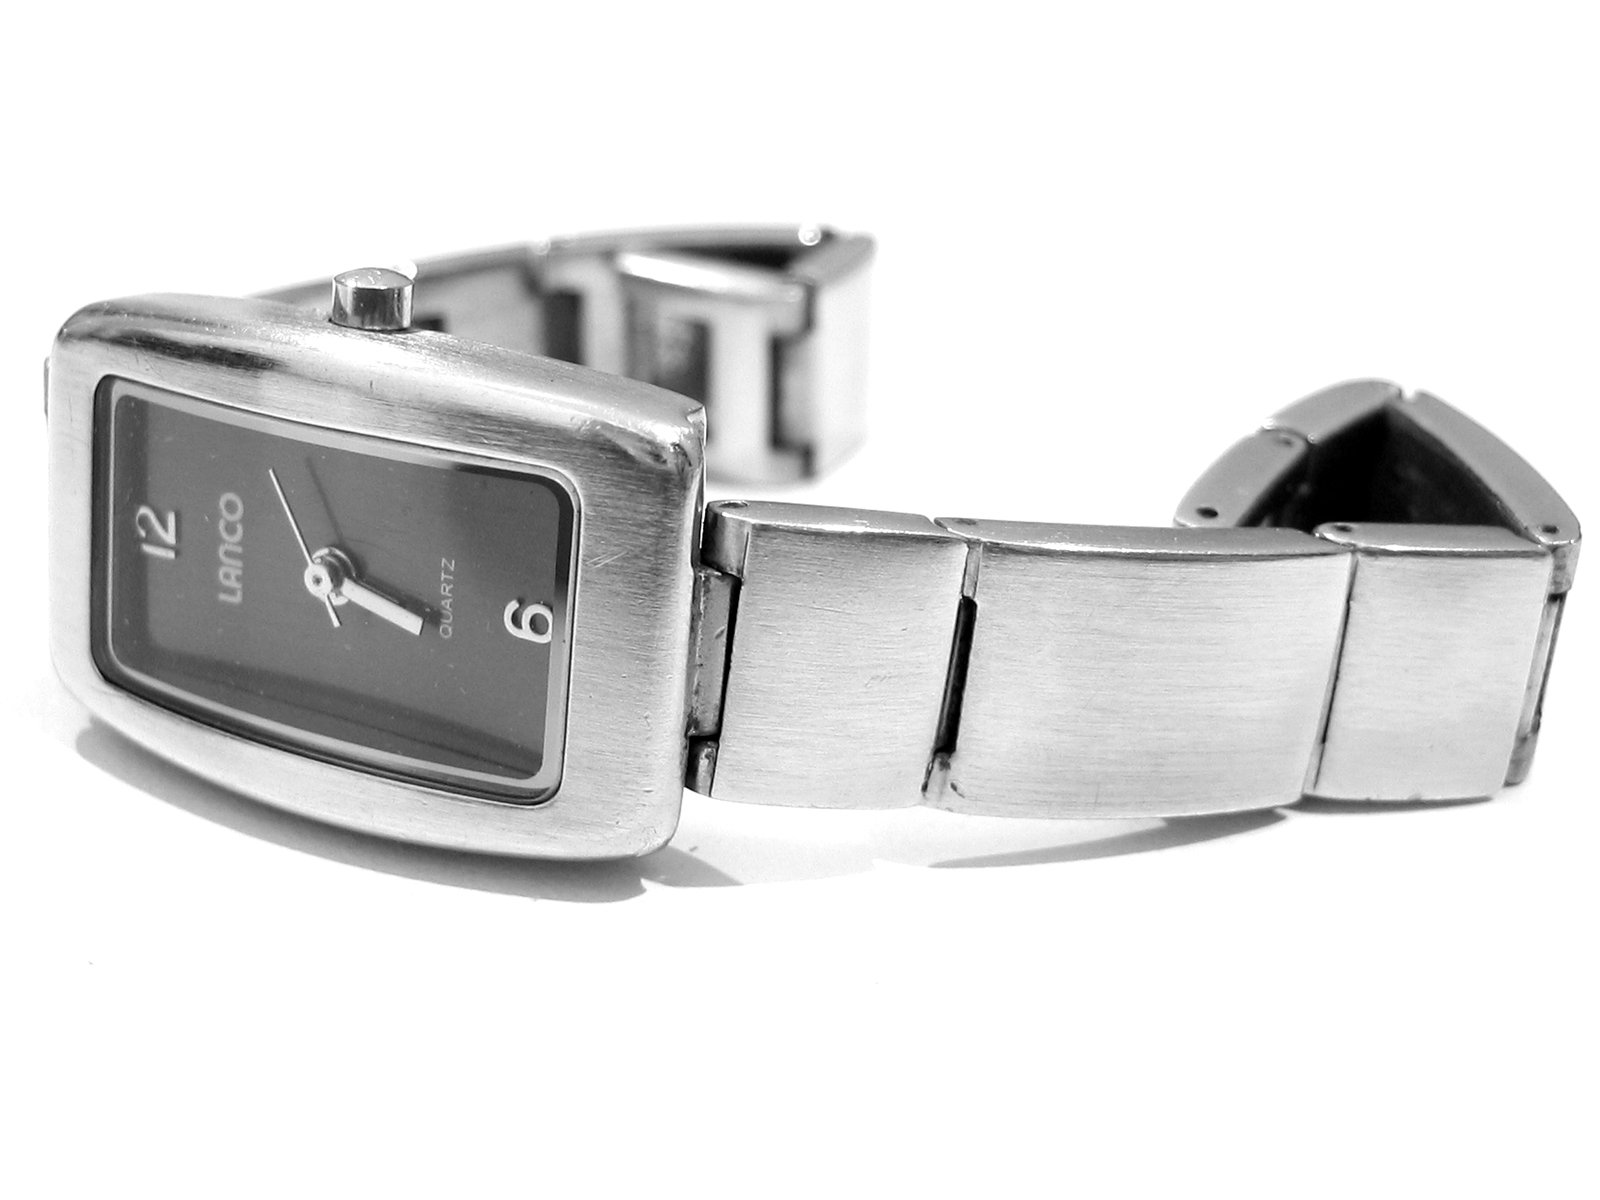 the square watch is silver and has a black face